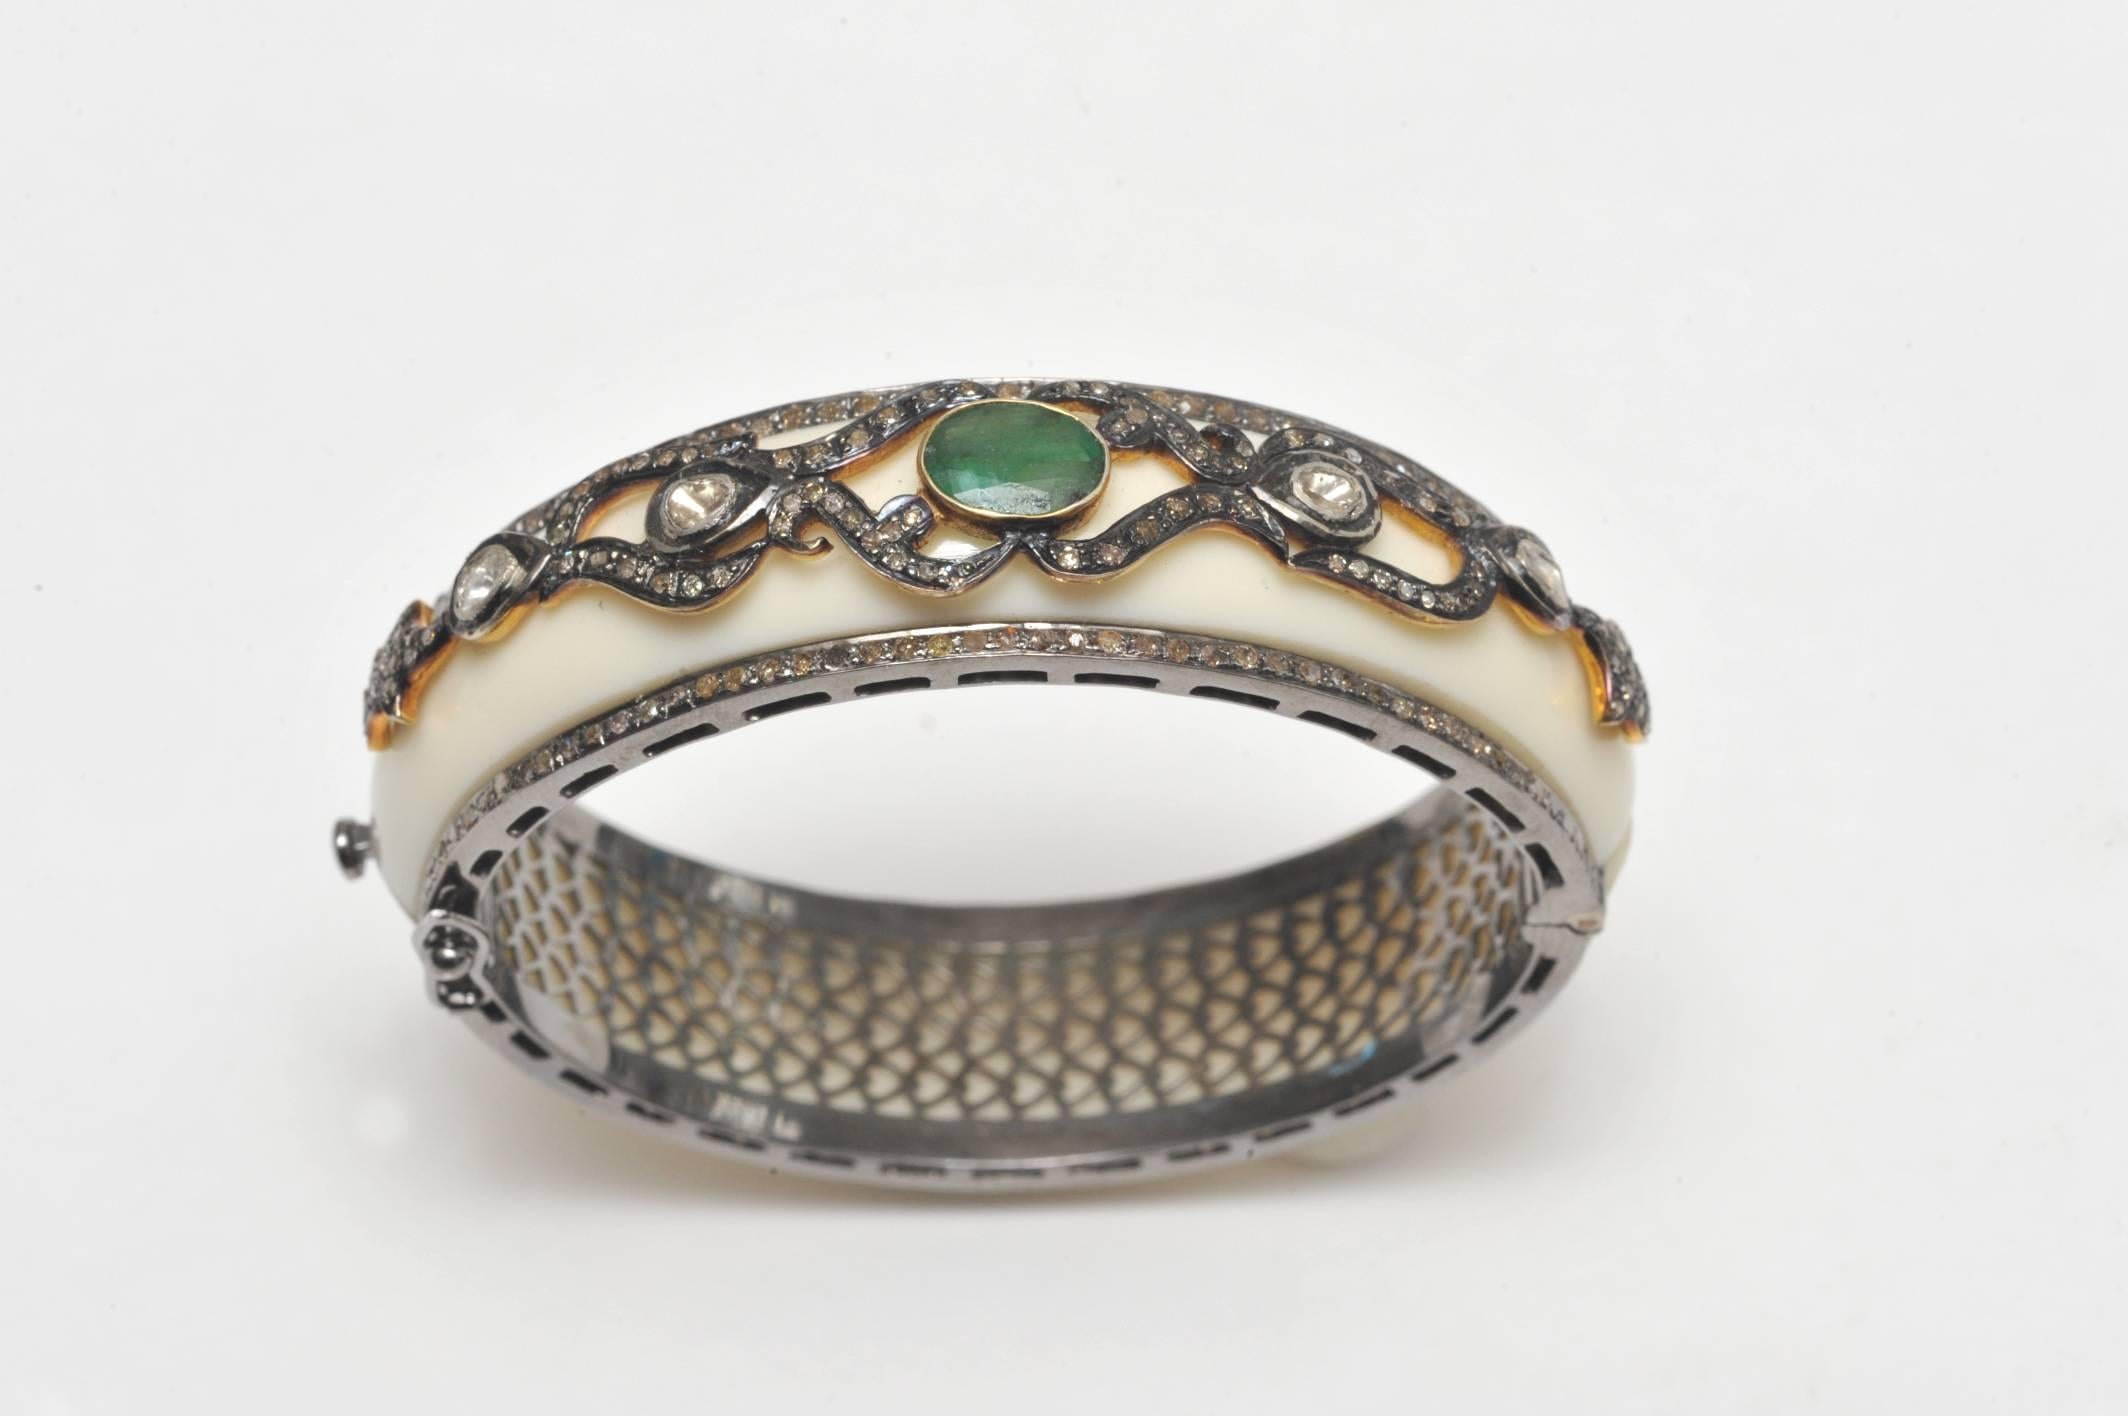 Oval shaped bakelite bracelet bordered in pave`set diamonds along both edges set in oxidized sterling silver.  Set on top of the bracelet is an oval shaped, faceted emerald (1.51 carats) along with rose cut diamonds and pave`set diamonds.  Total